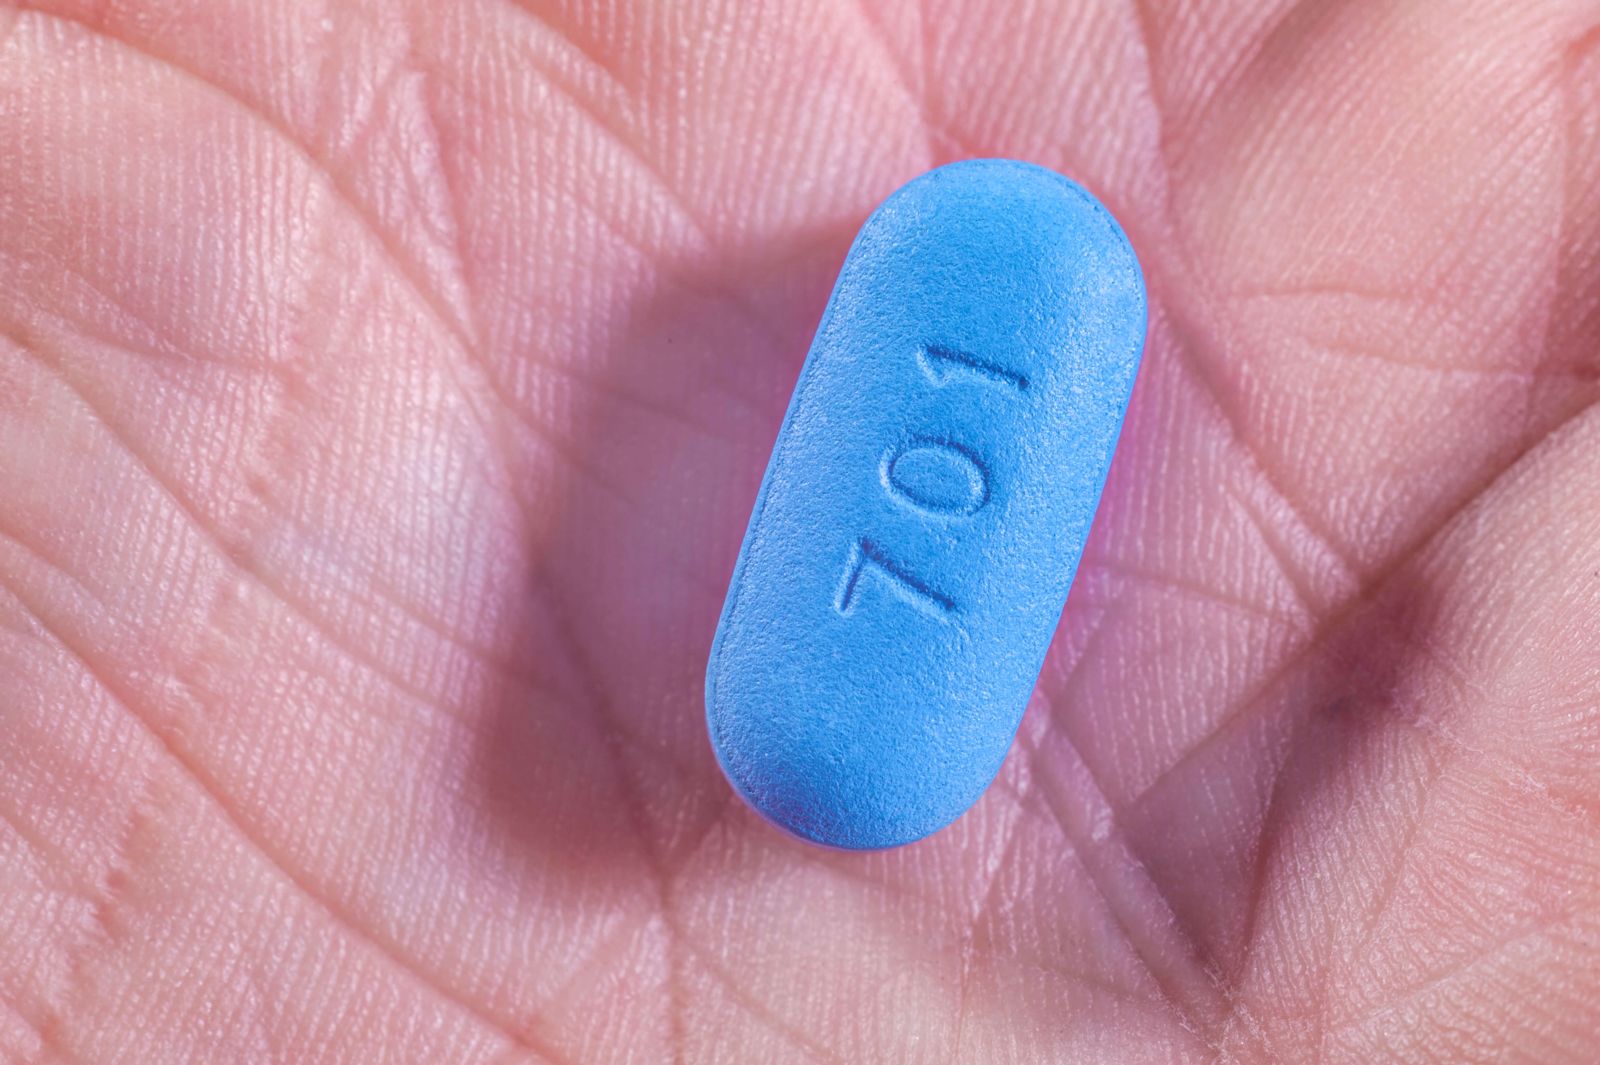 You May Have a Claim for Compensation If You Have Been Harmed by Truvada or Other Drugs With TDF